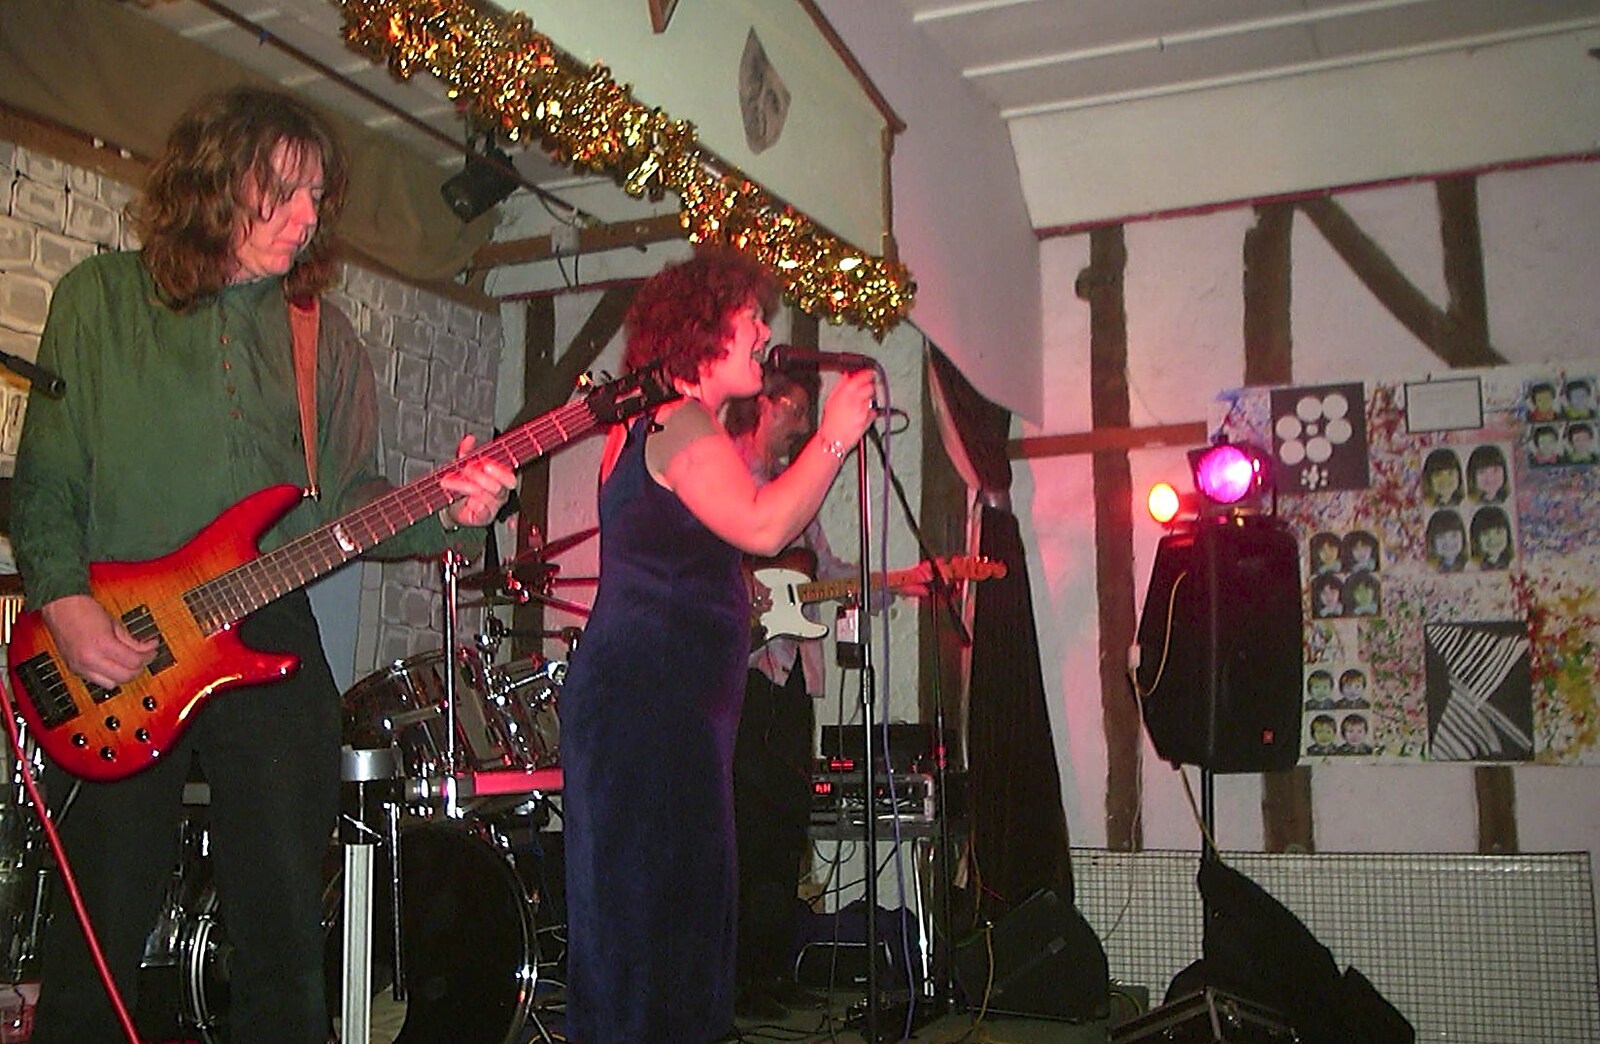 Jo belts one out from The BBs and a Visit from Trotsky, Bressingham, Norfolk - 13th December 2003